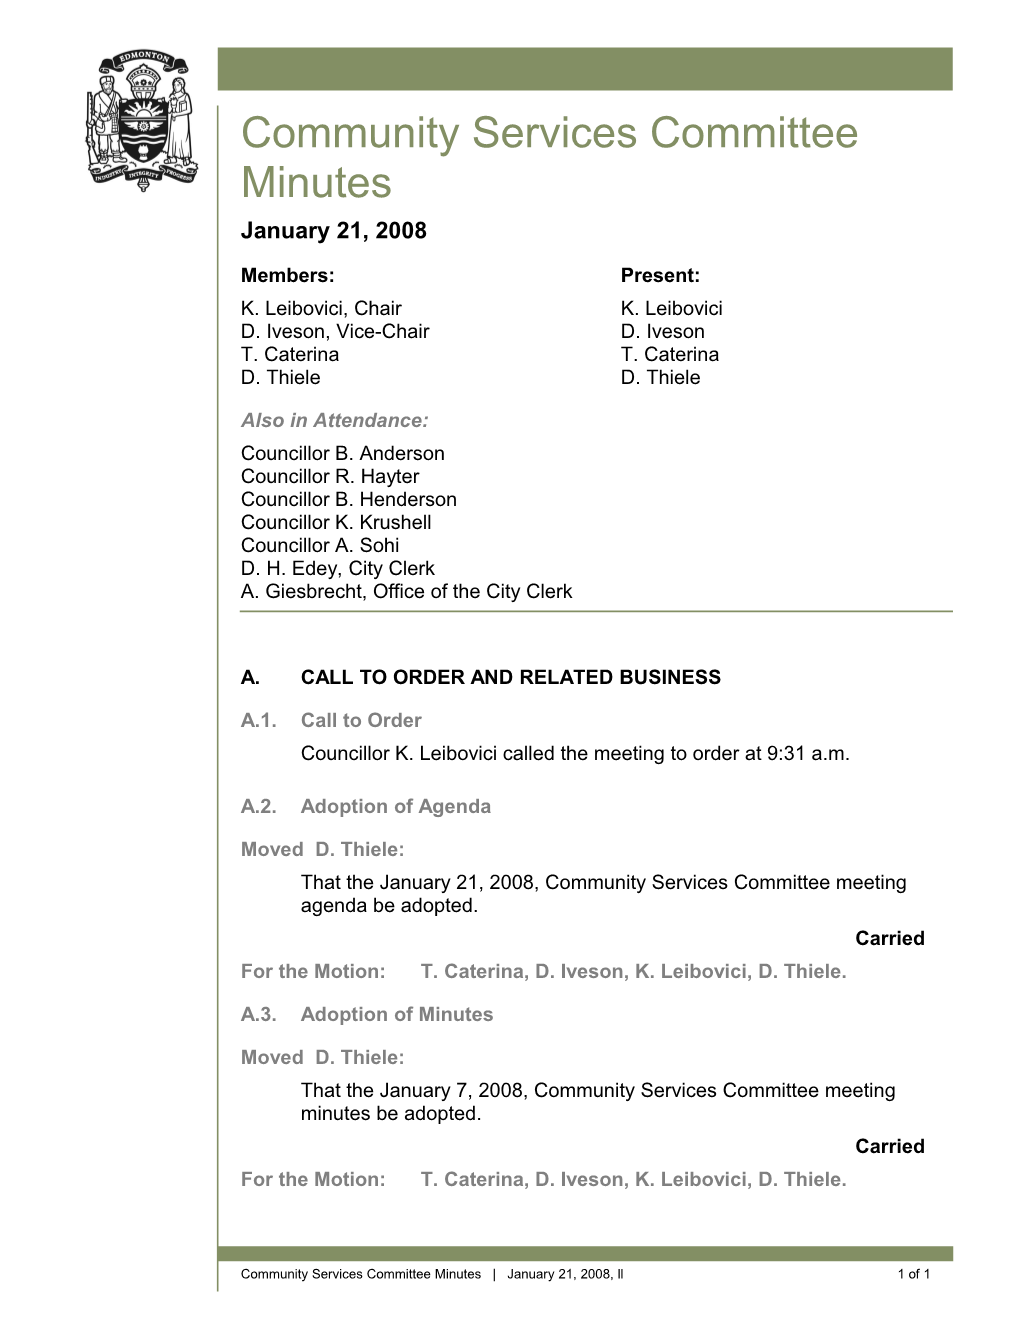 Minutes for Community Services Committee January 21, 2008 Meeting